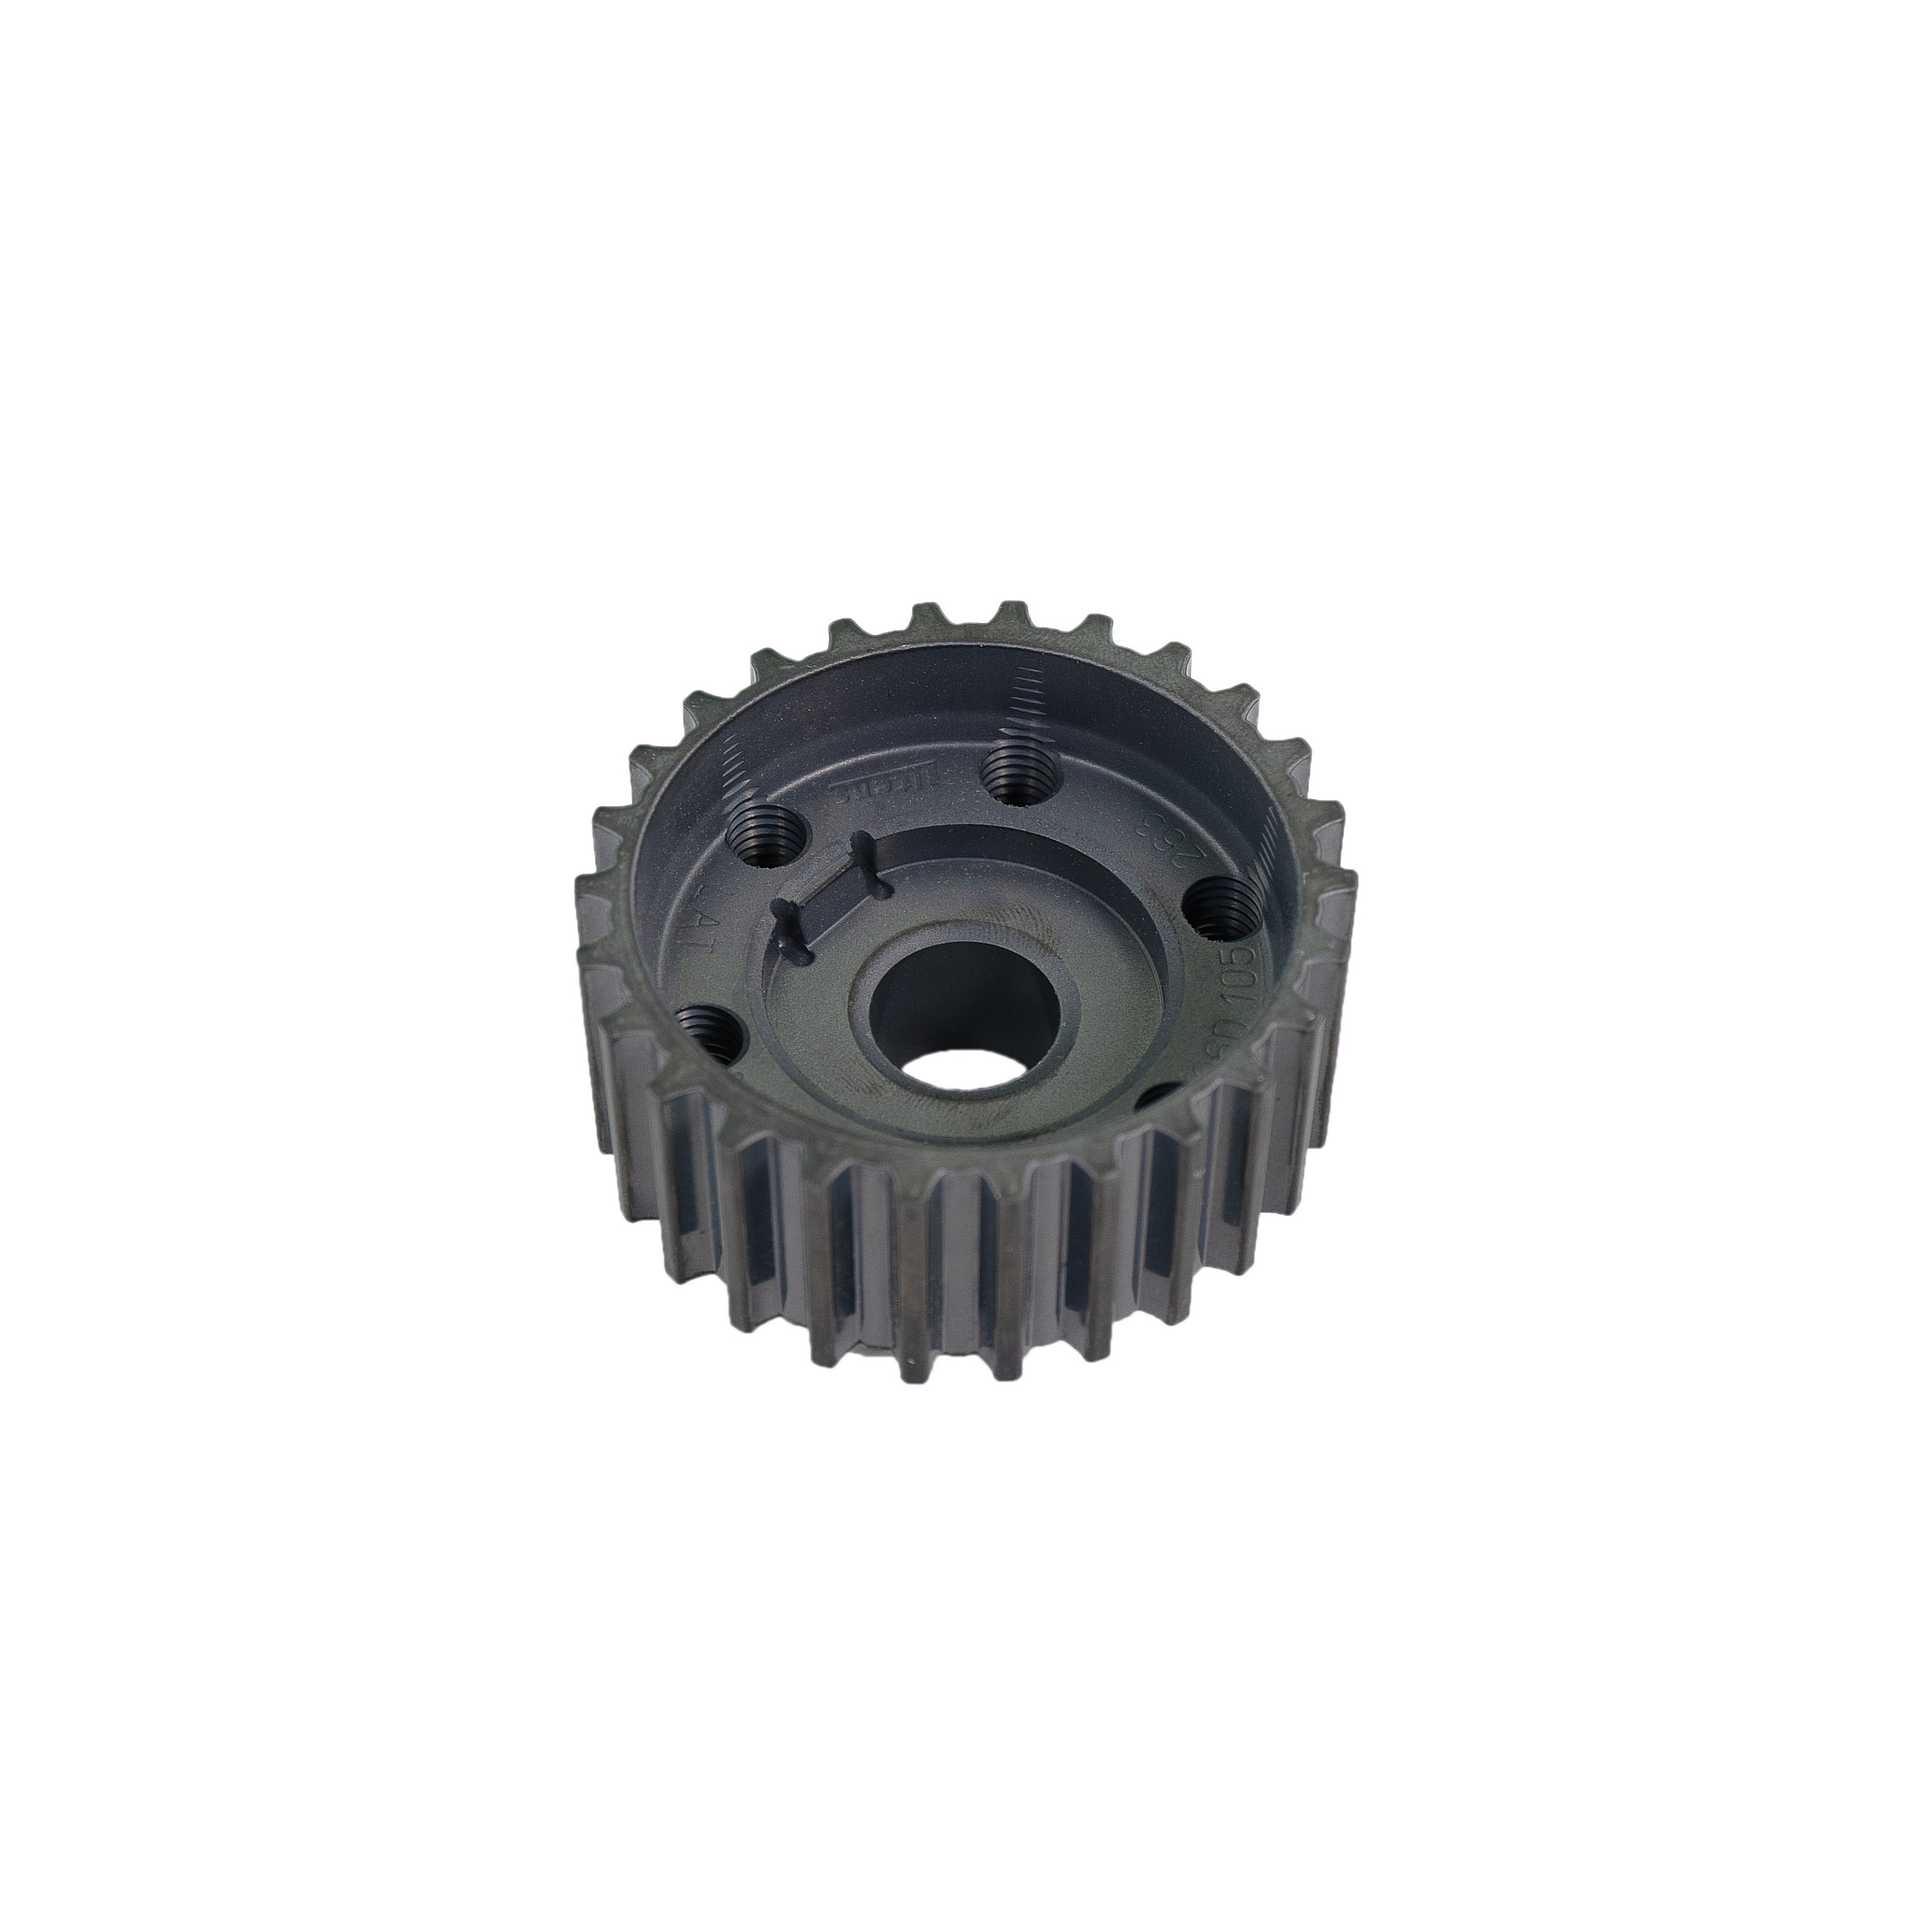 BAR-TEK® Replacement gear wheel for pulley Fits VAG 2.0L TFSI & TSI